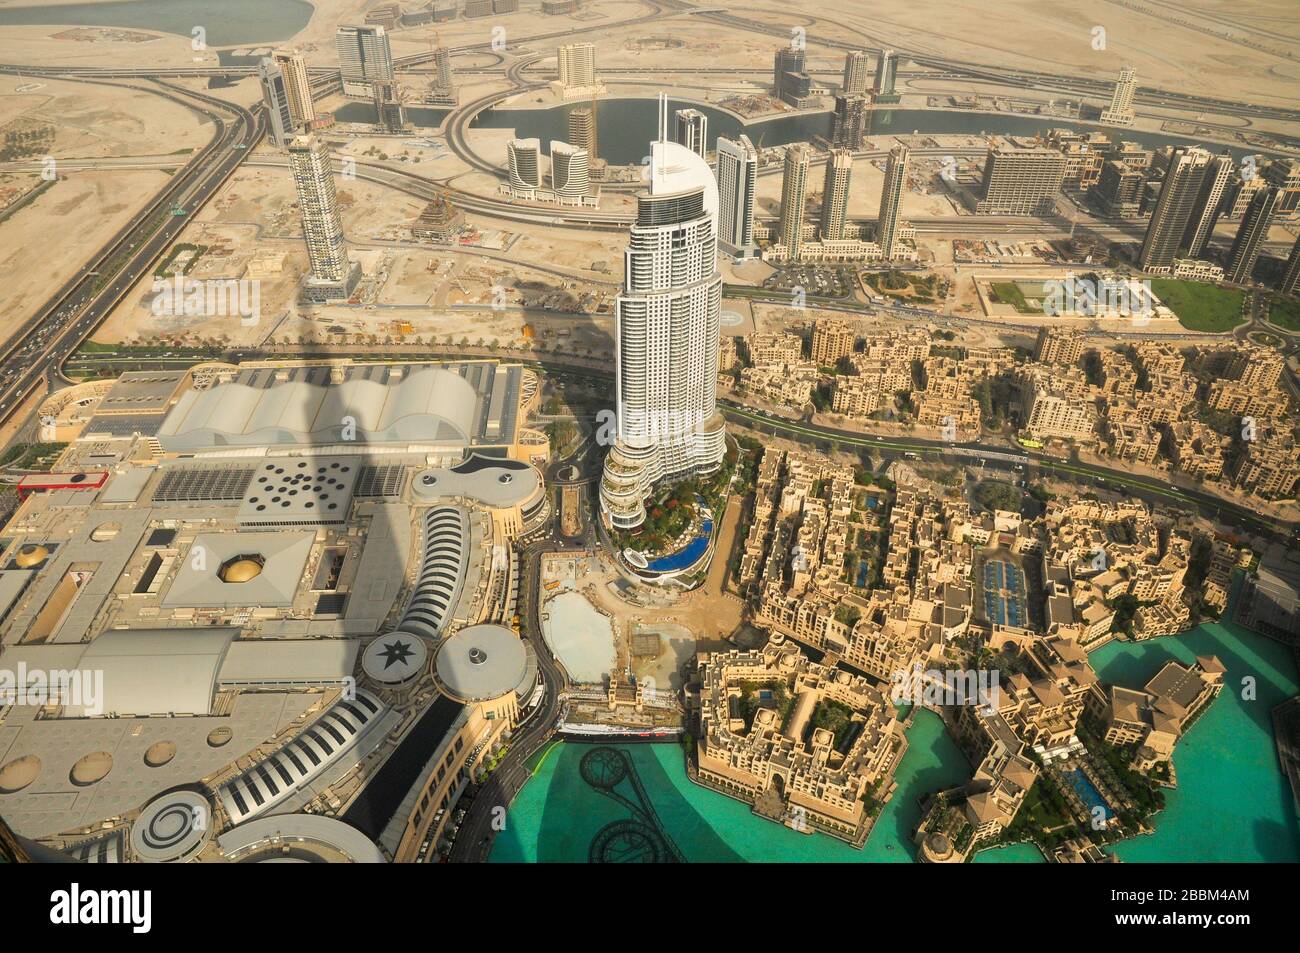 Emaar building and downtown, View from Burj Khalifa, Dubai, United Arab Emirates, Middle East. Stock Photo